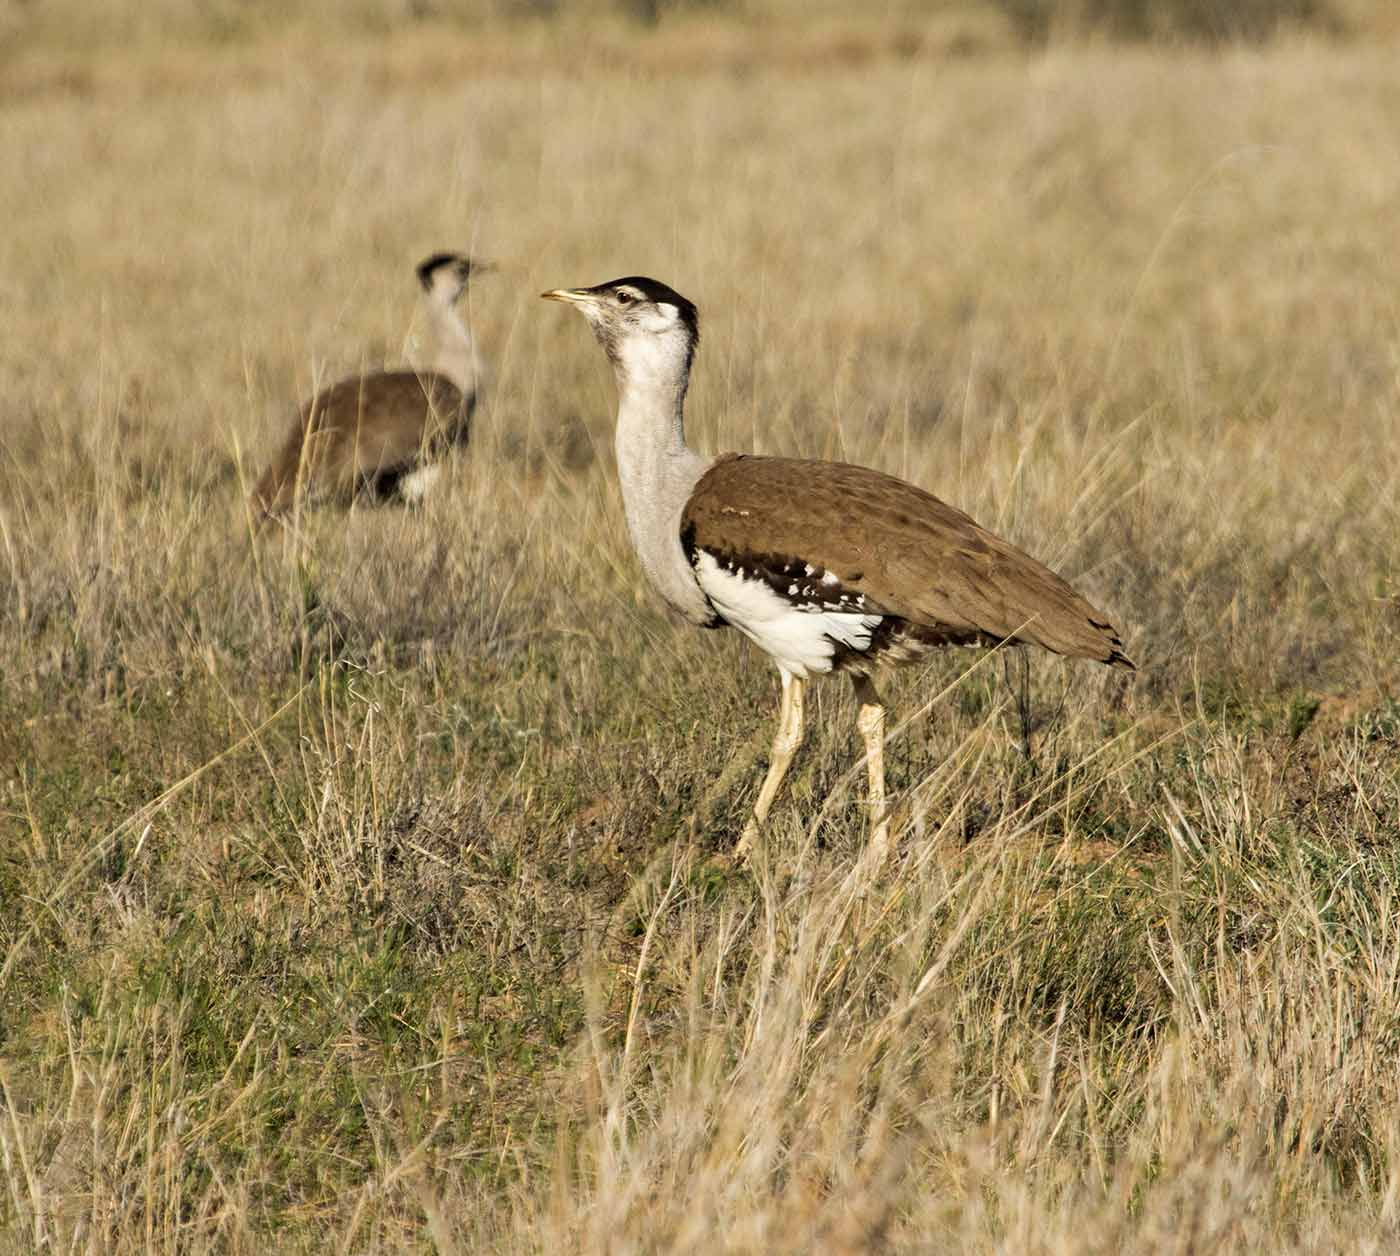 Colour photo of two birds of brown and black walking through grassland.